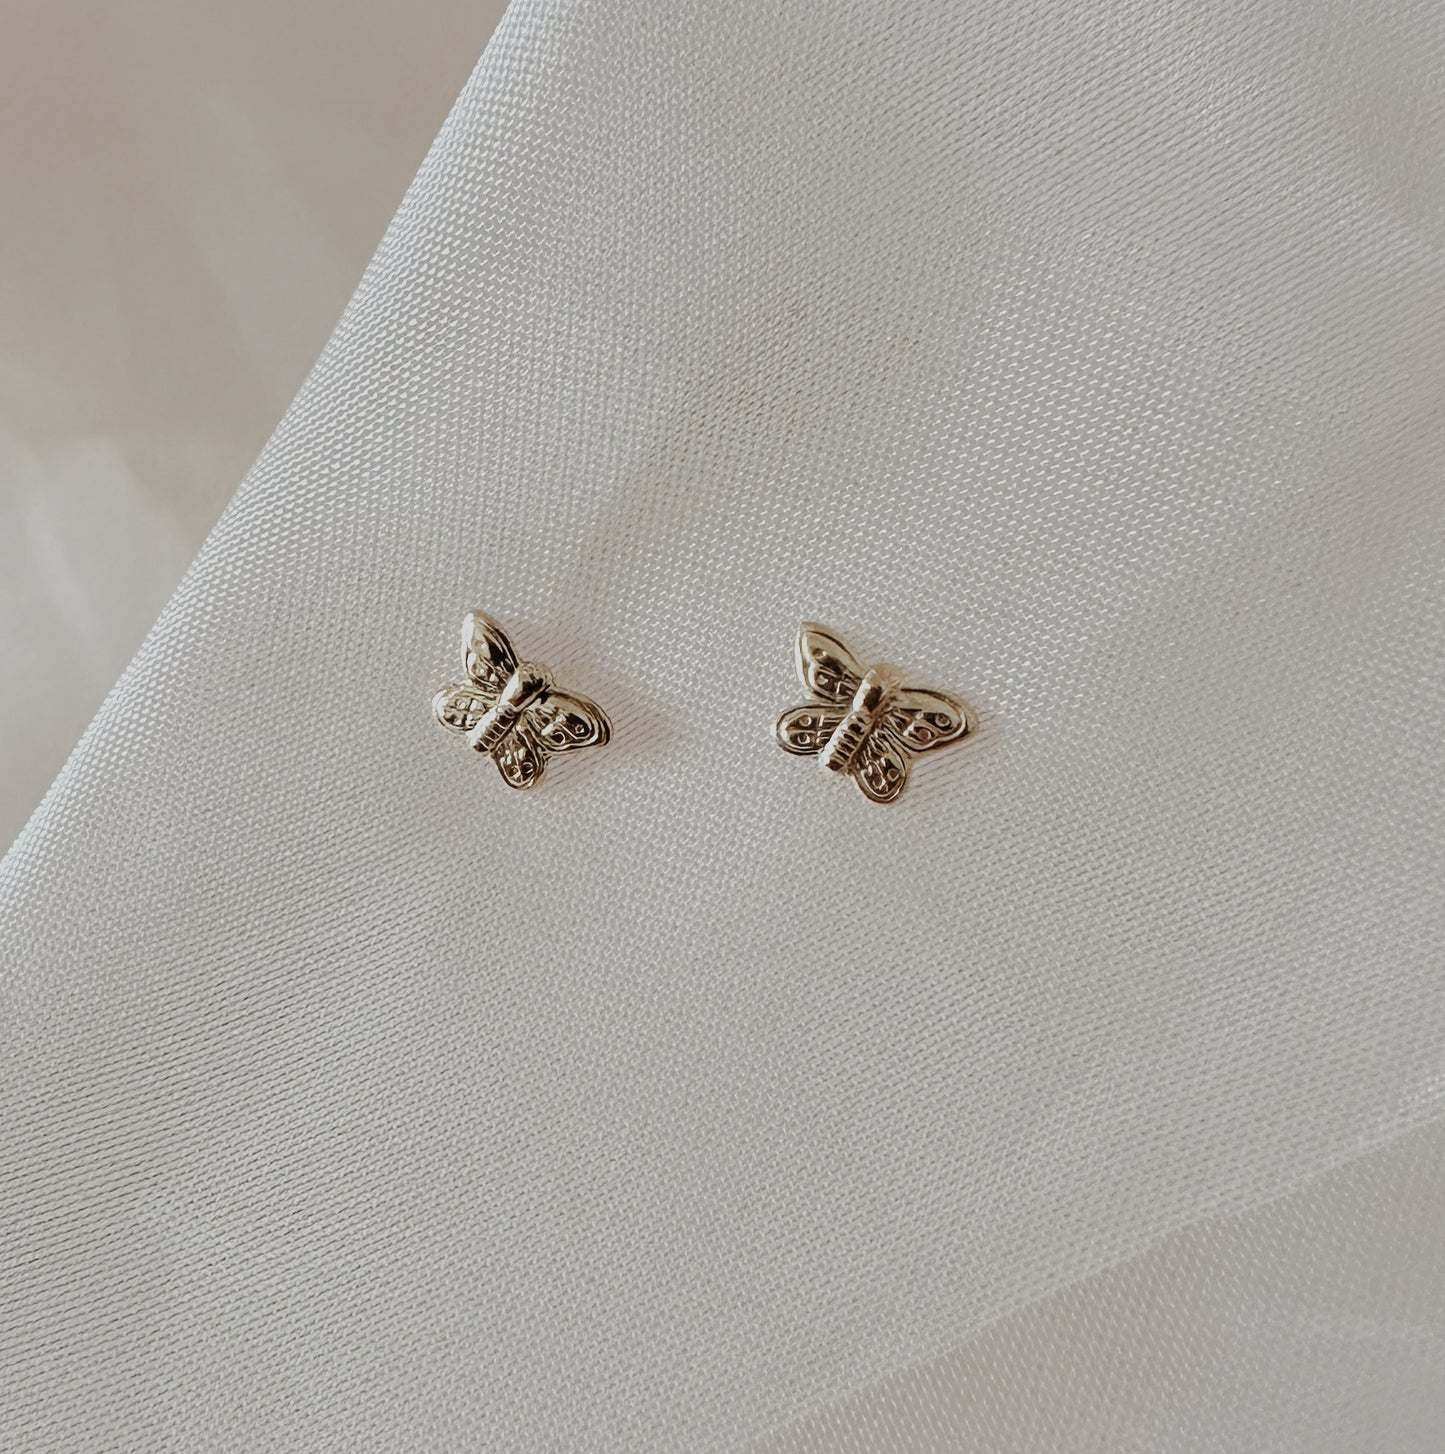 Micro Butterfly Studs